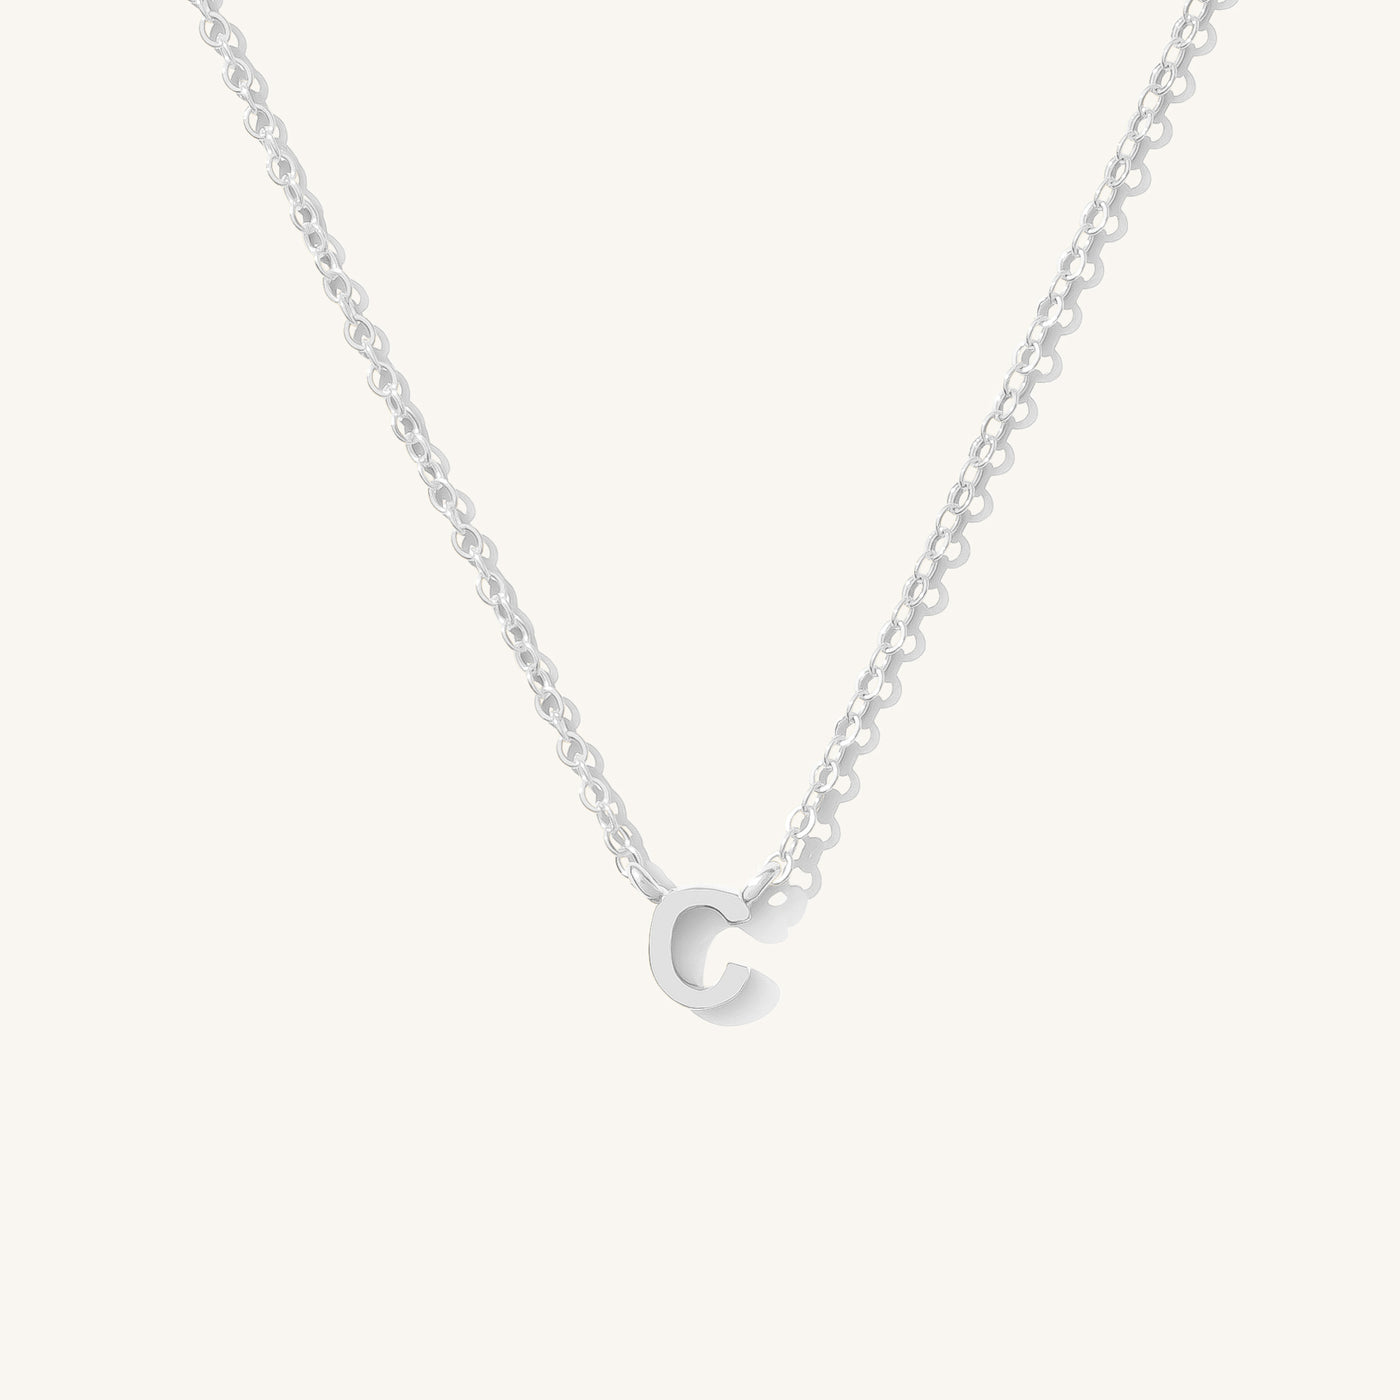 C Tiny Initial Necklace